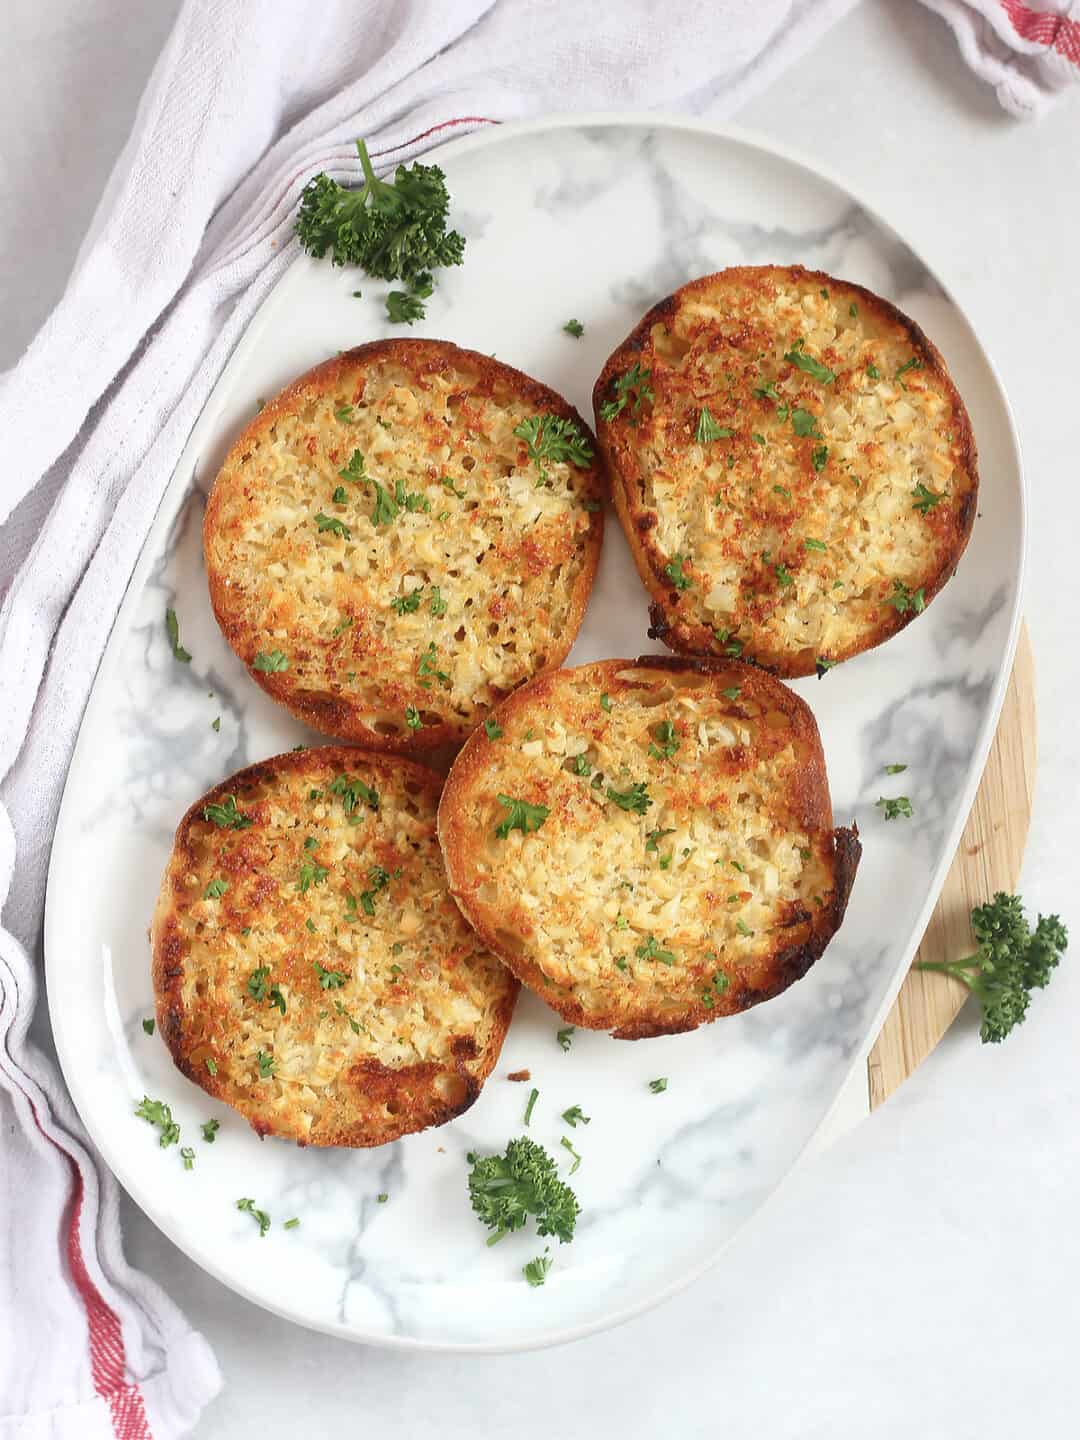 Baked garlic bread English muffins on a plate with fresh parsley garnish.